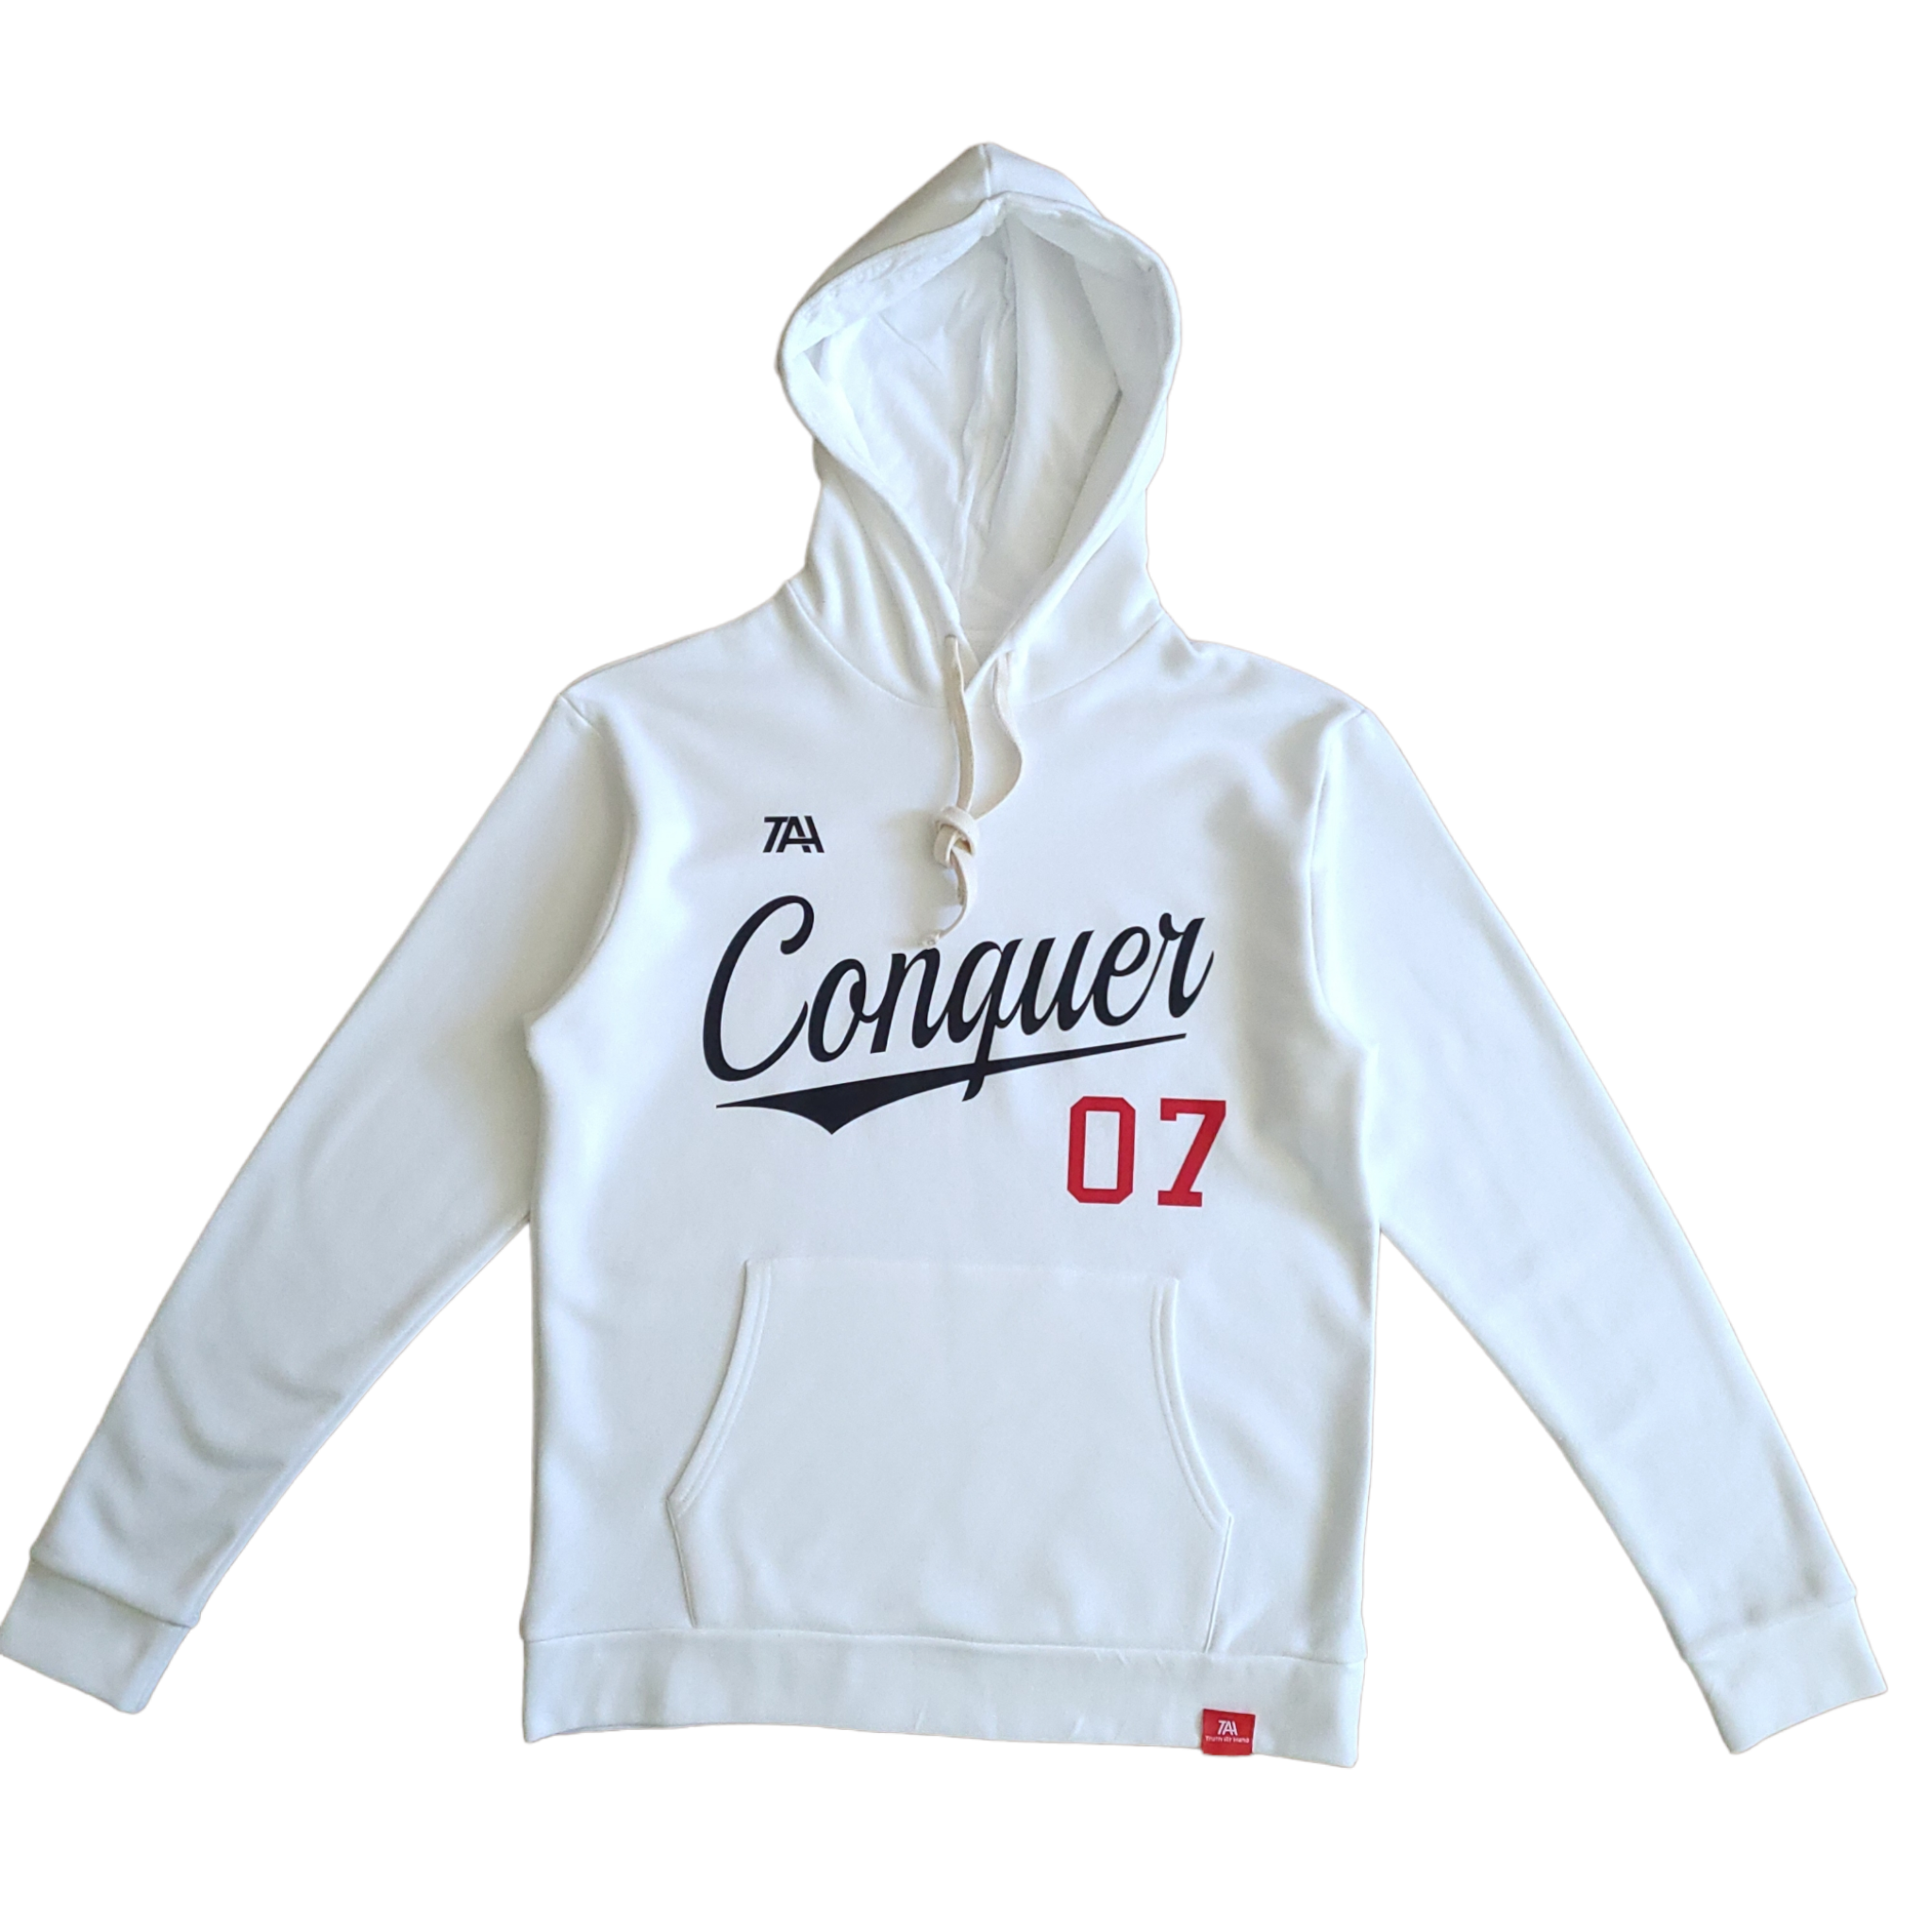 Conquer (Limited Edition)